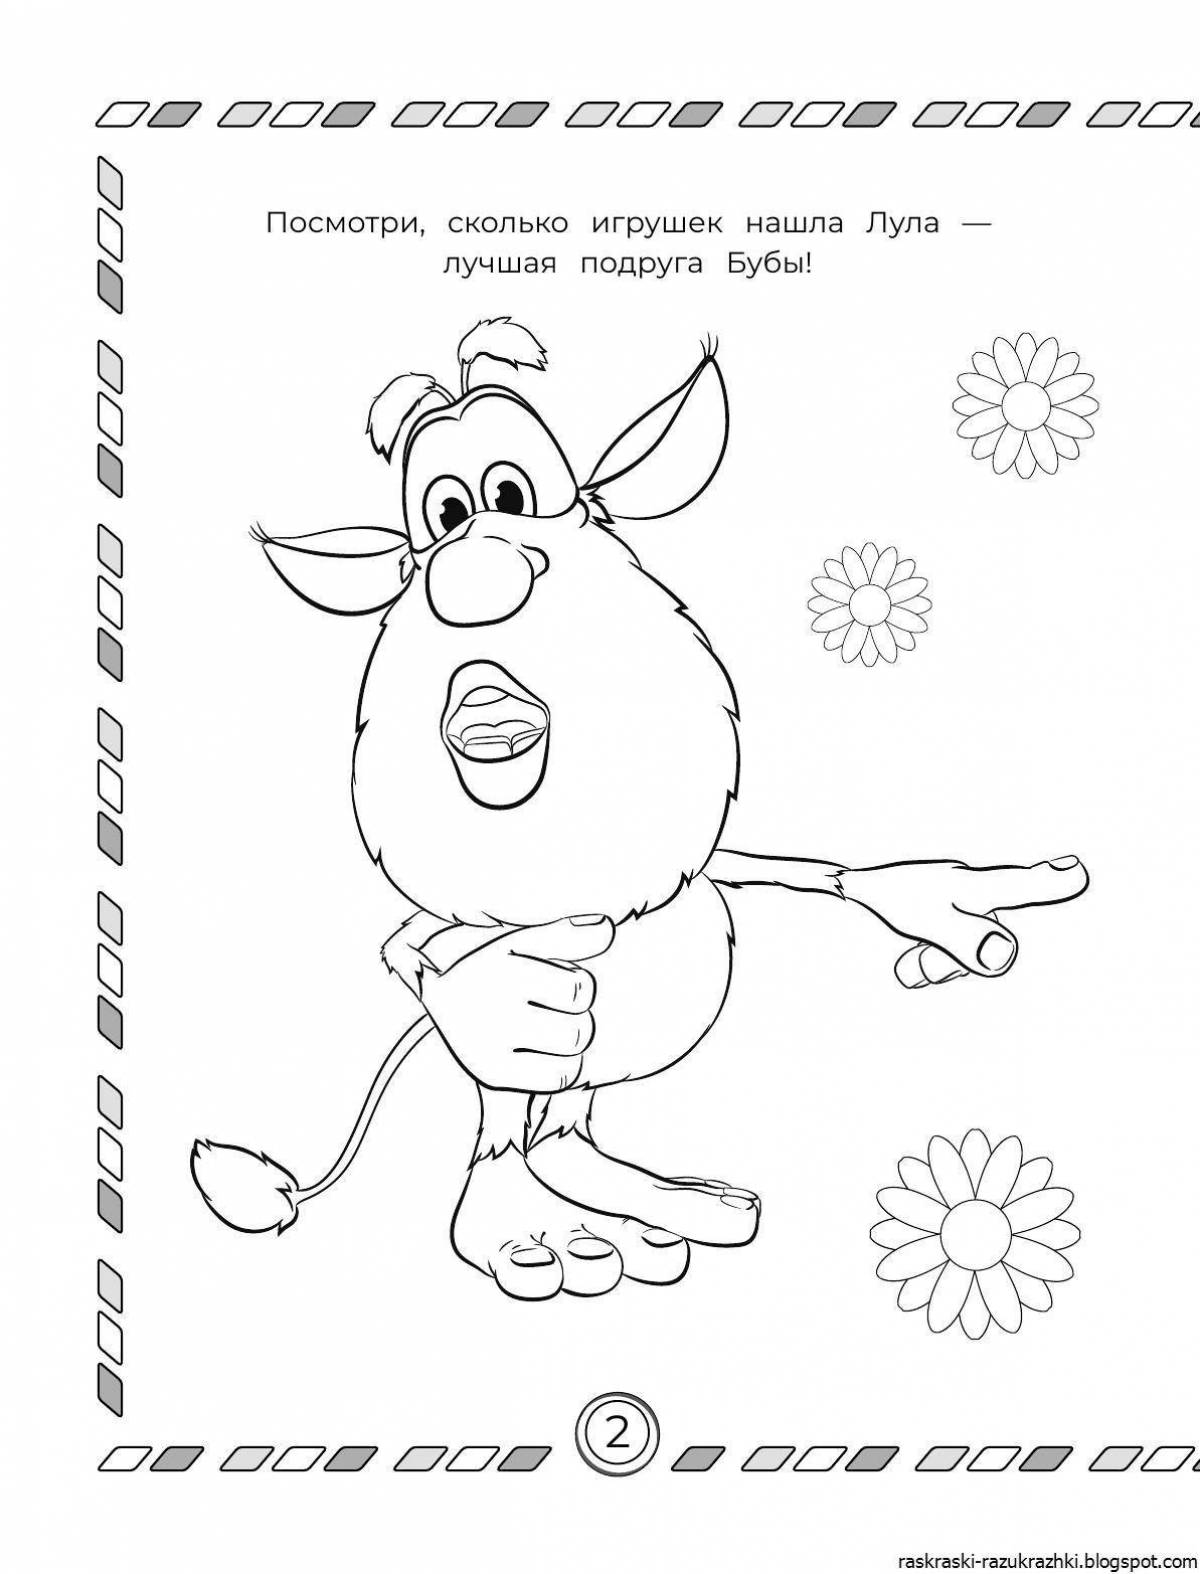 Exciting buba coloring book for 2-3 year olds